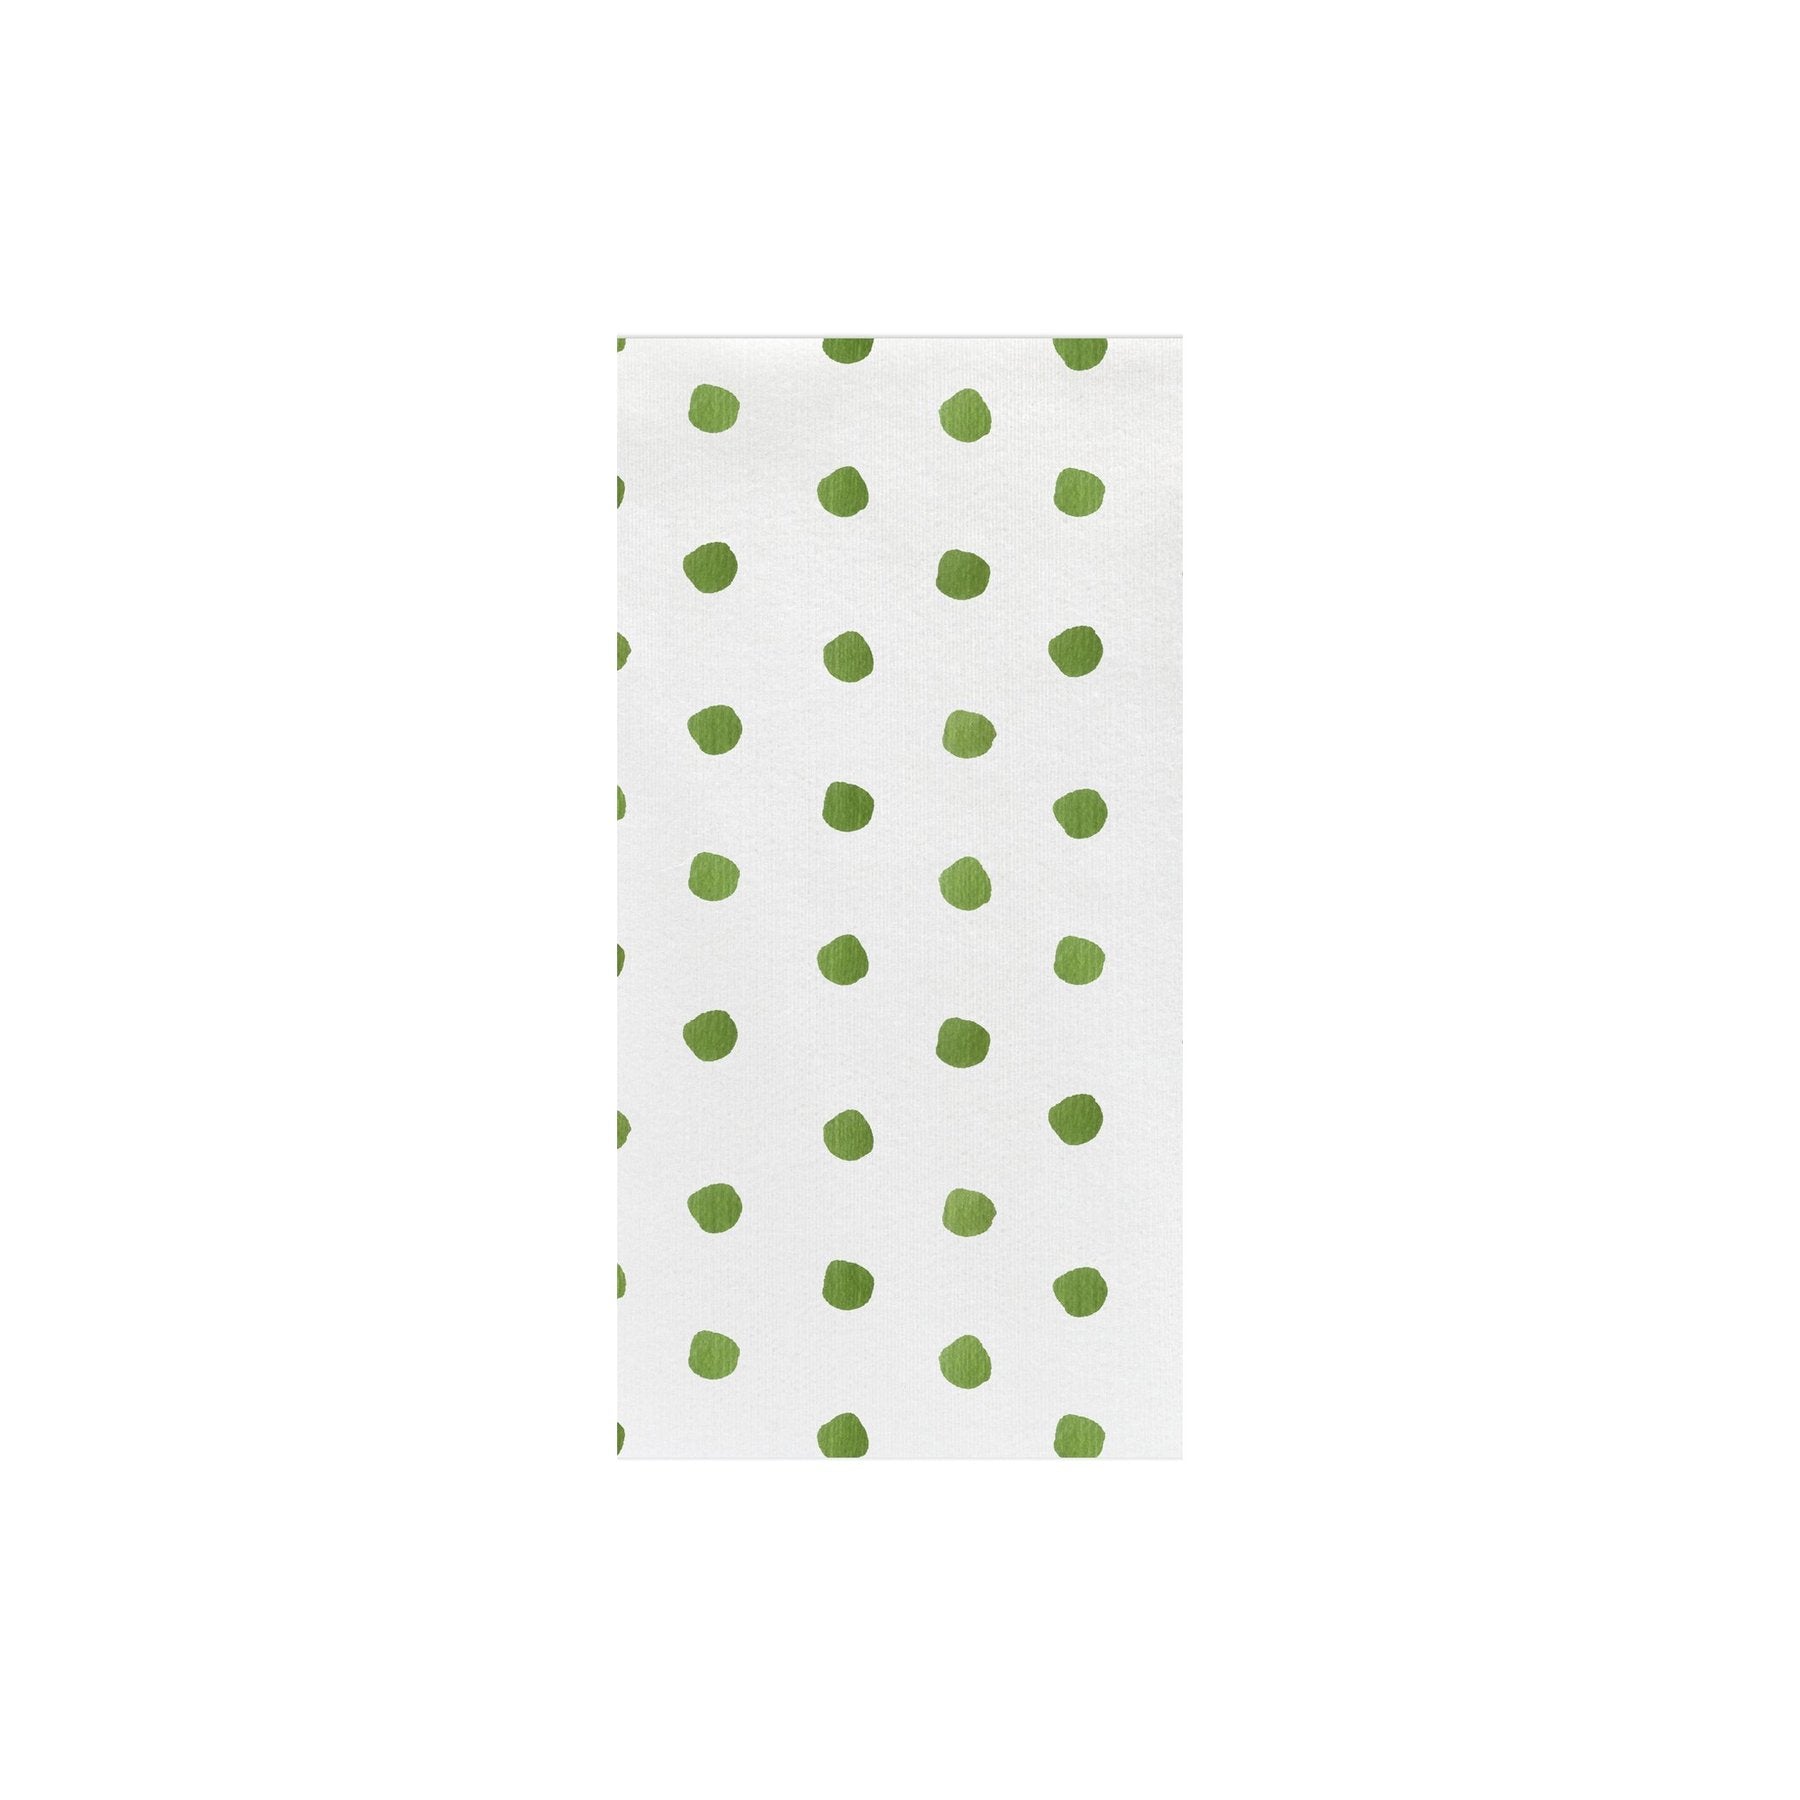 Papersoft Napkins Green Dot Guest Towels - Pack of 20